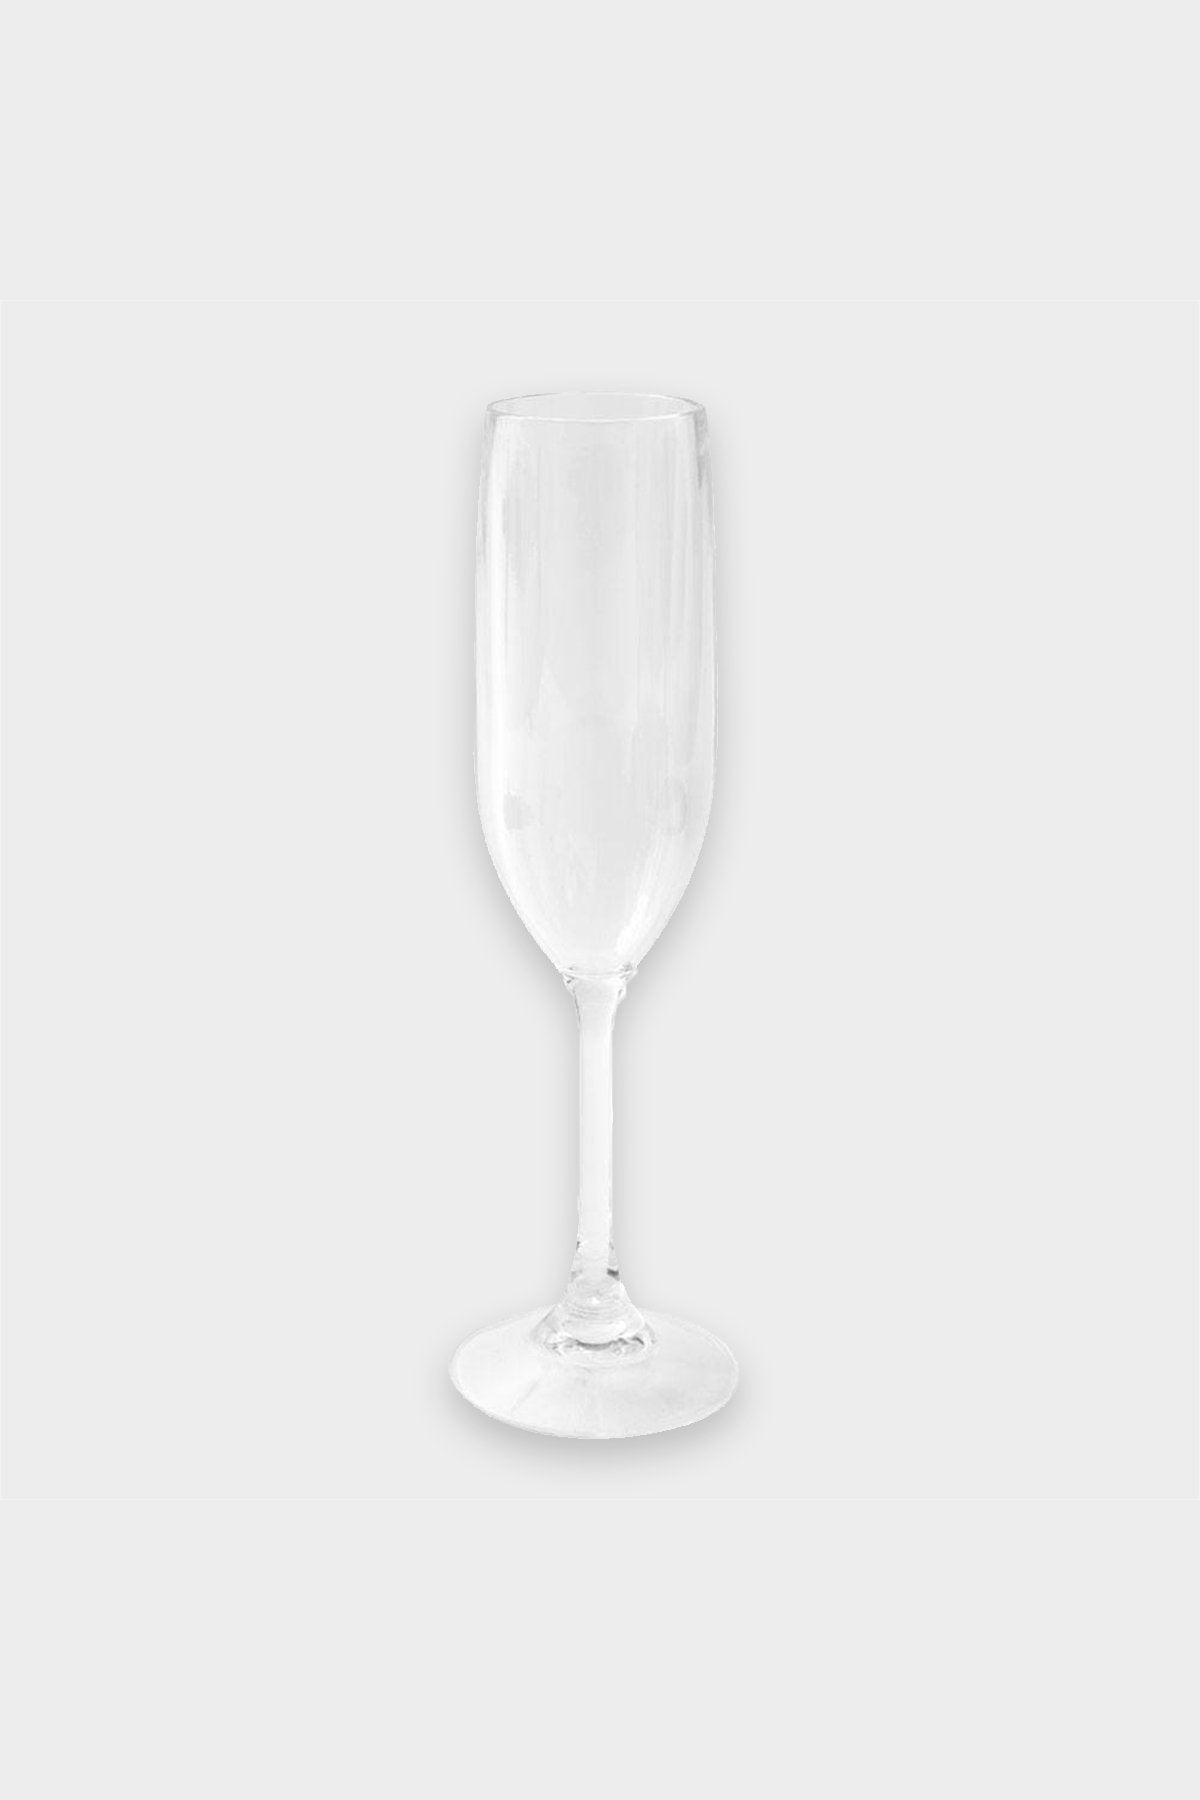 Acrylic 6oz Champagne Flute in Crystal Clear - shop-olivia.com